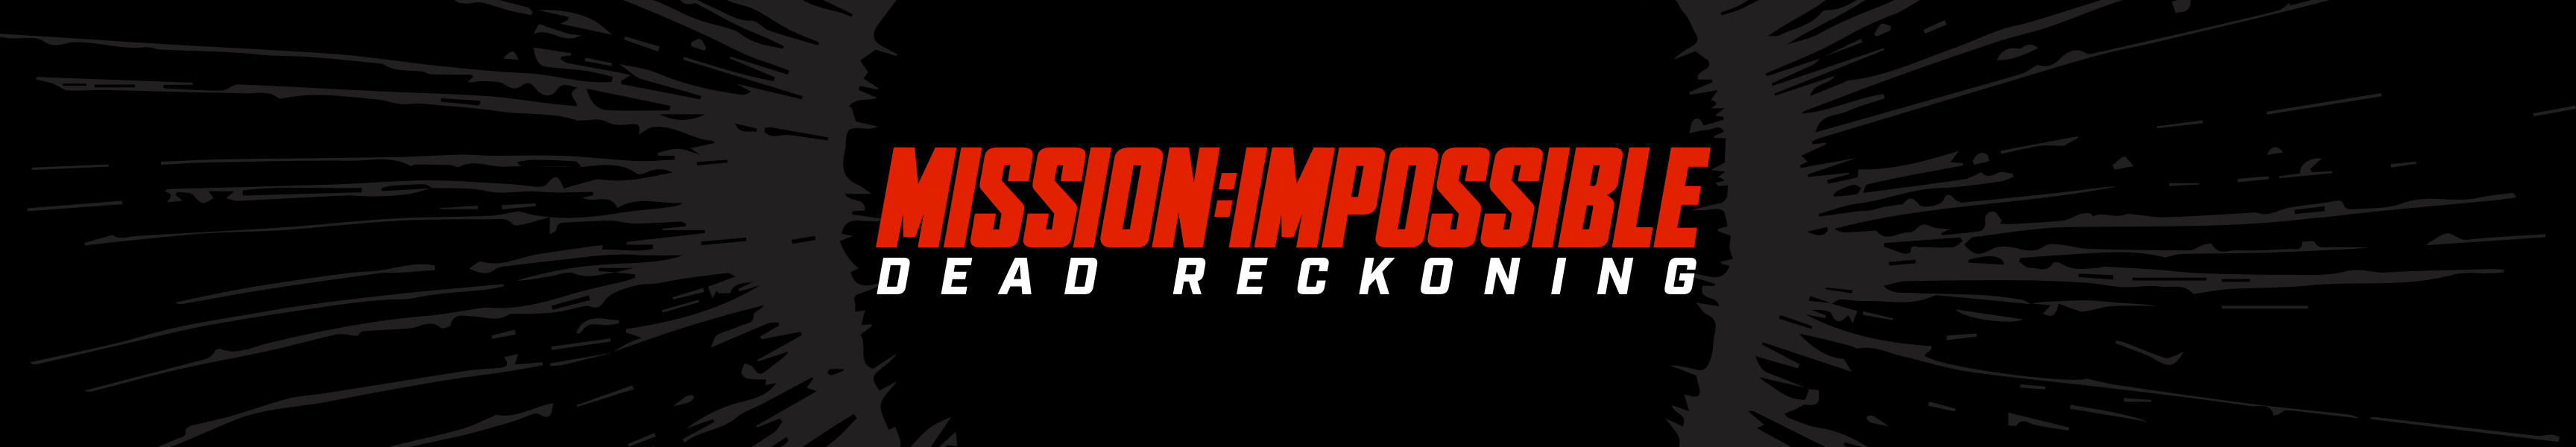 Mission: Impossible Kleidung